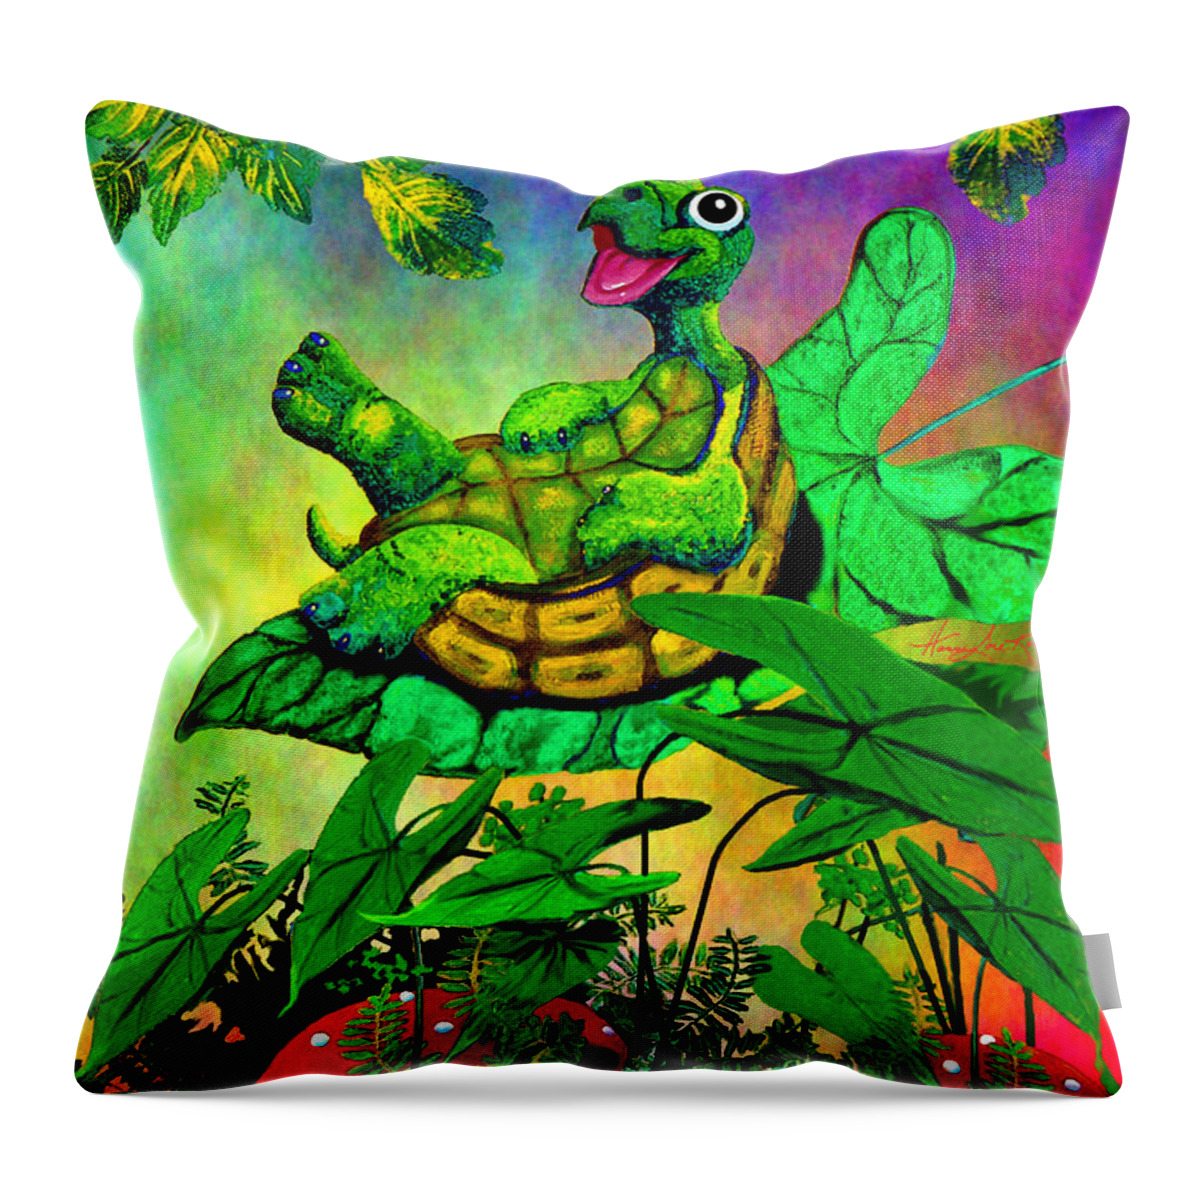 Turtle Throw Pillow featuring the painting Turtle-totter by Hanne Lore Koehler